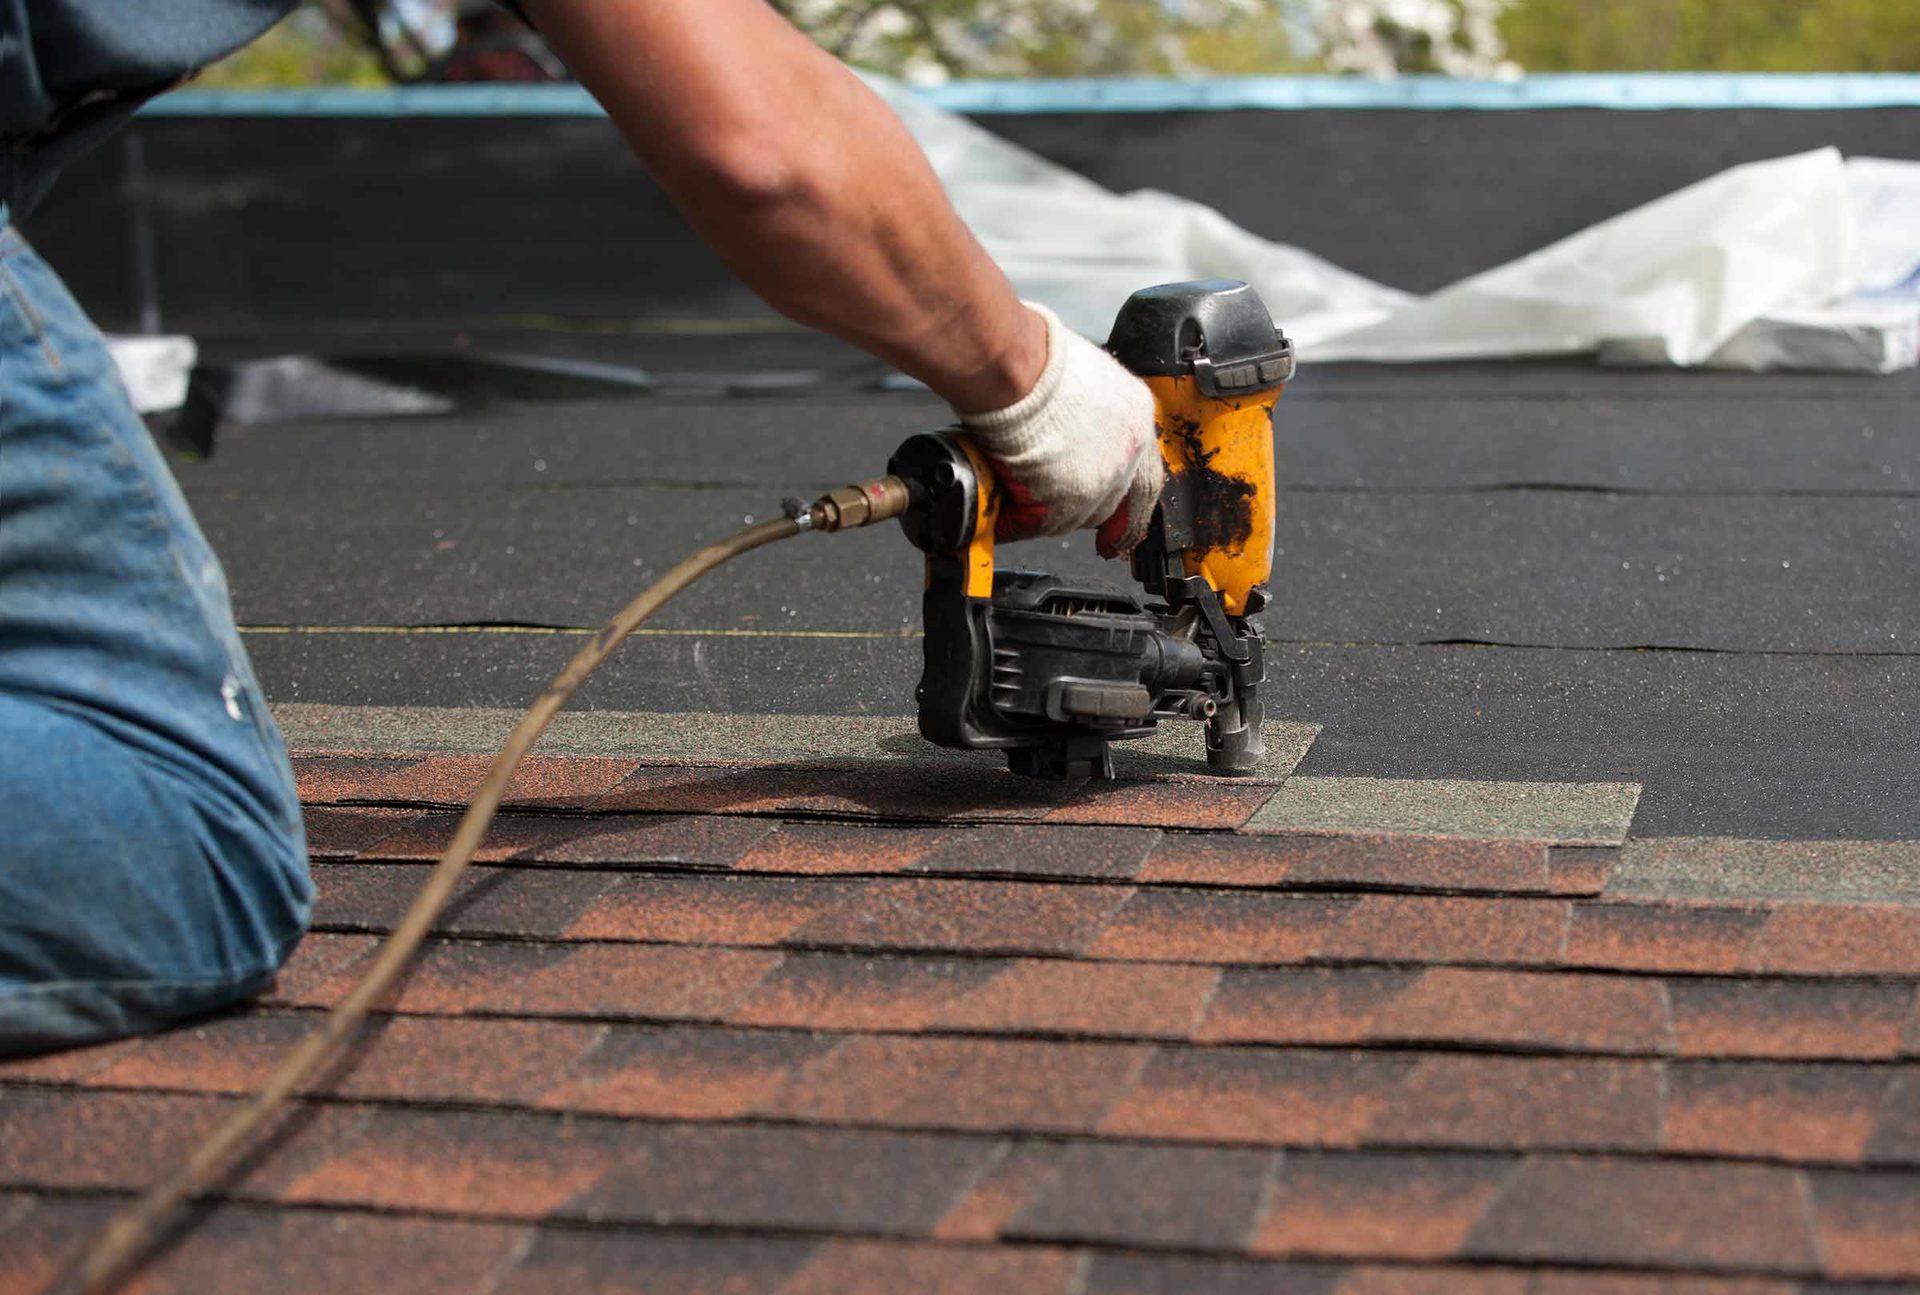 Local Roof Repairs Miami, FL Roof Repair Experts Near Me Bob Hilson Miami Roofing Experts